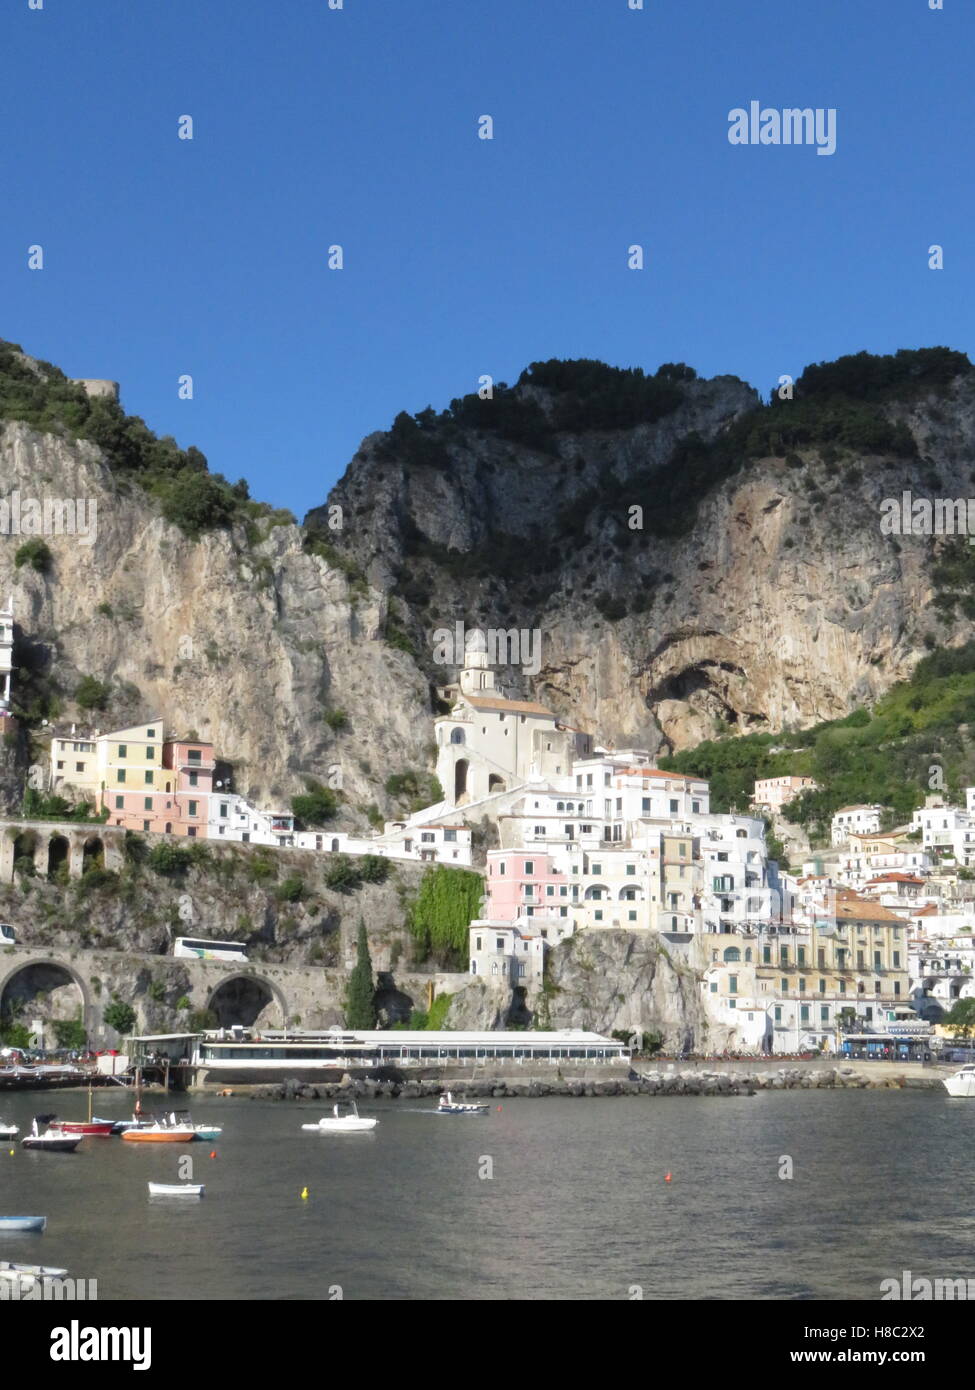 Amalfi town viewed from the sea Stock Photo